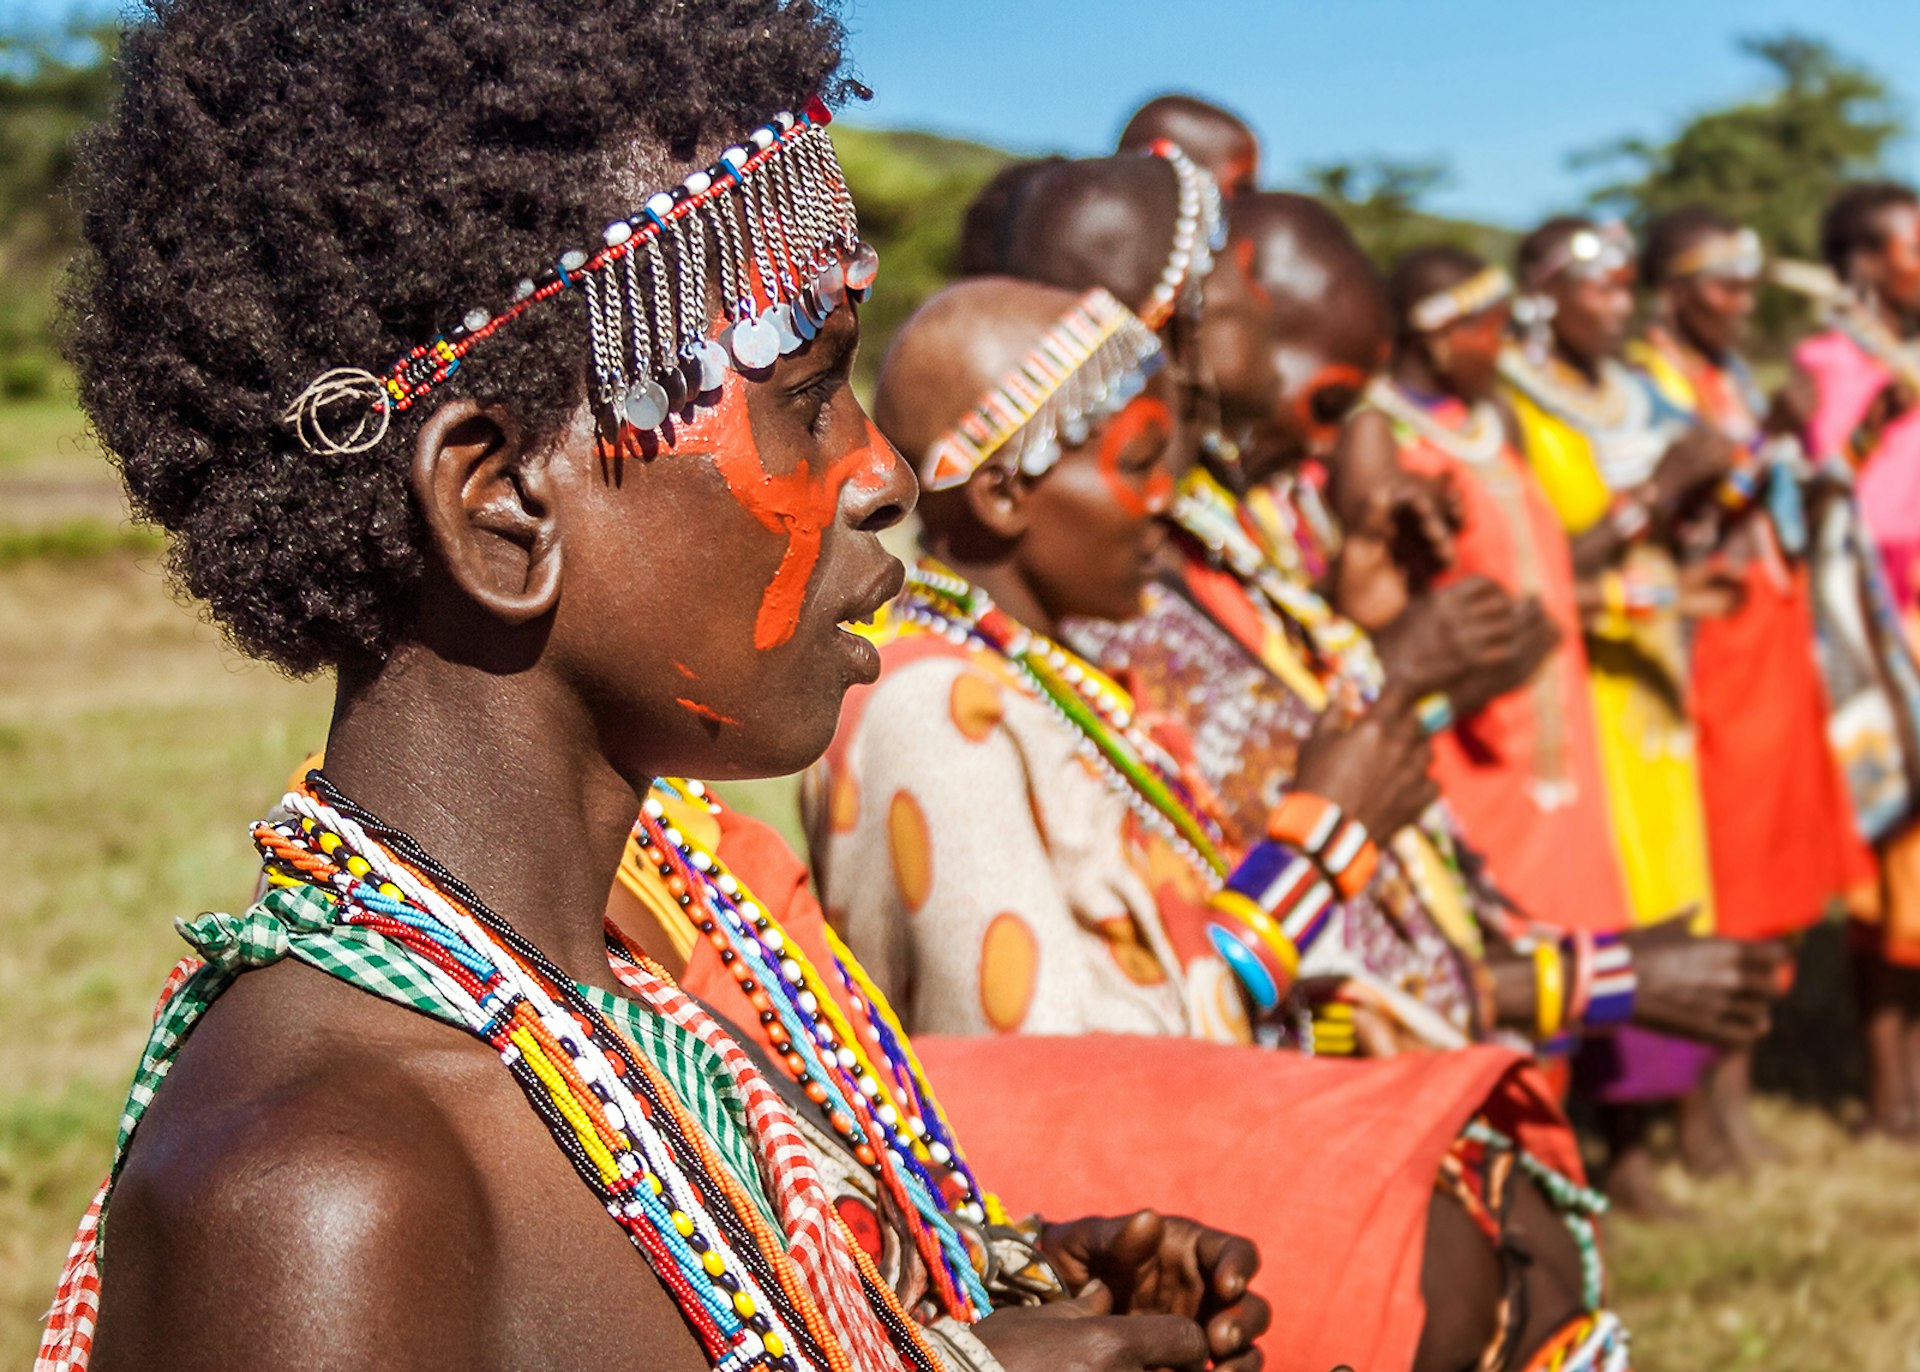 Masai women in traditional costume lined up during a ceremony © pierivb / Getty Images